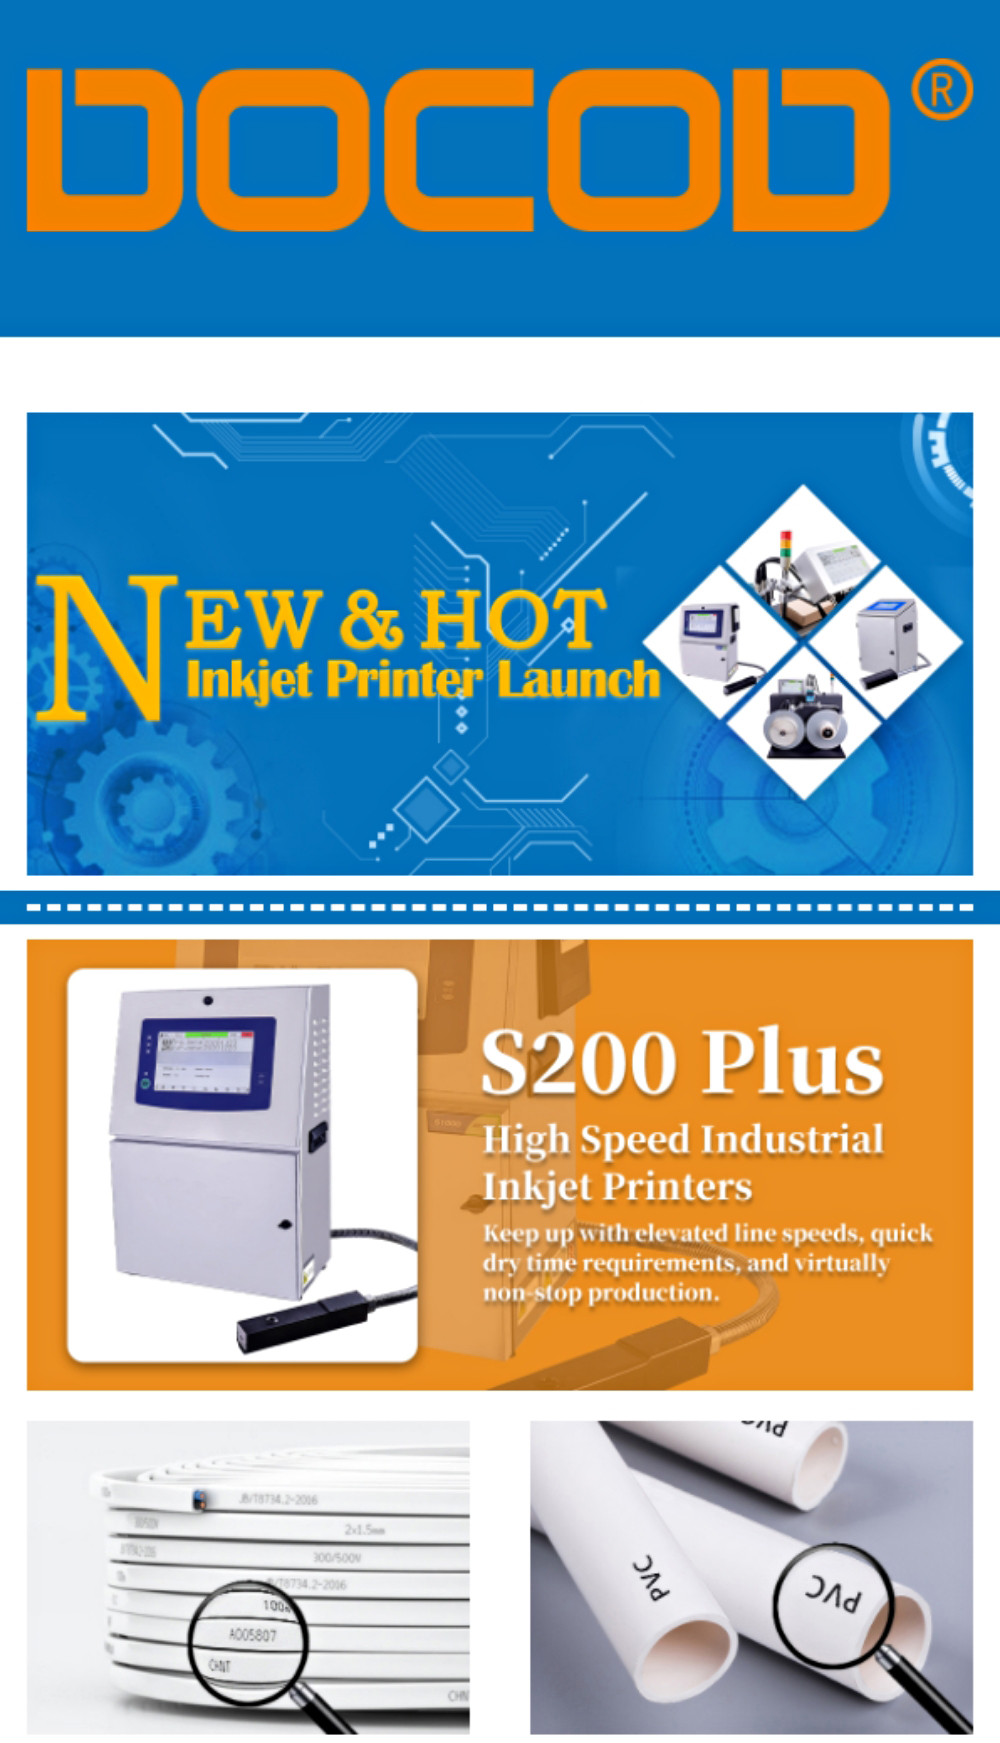 New and Hot Inkjet Printers Launch